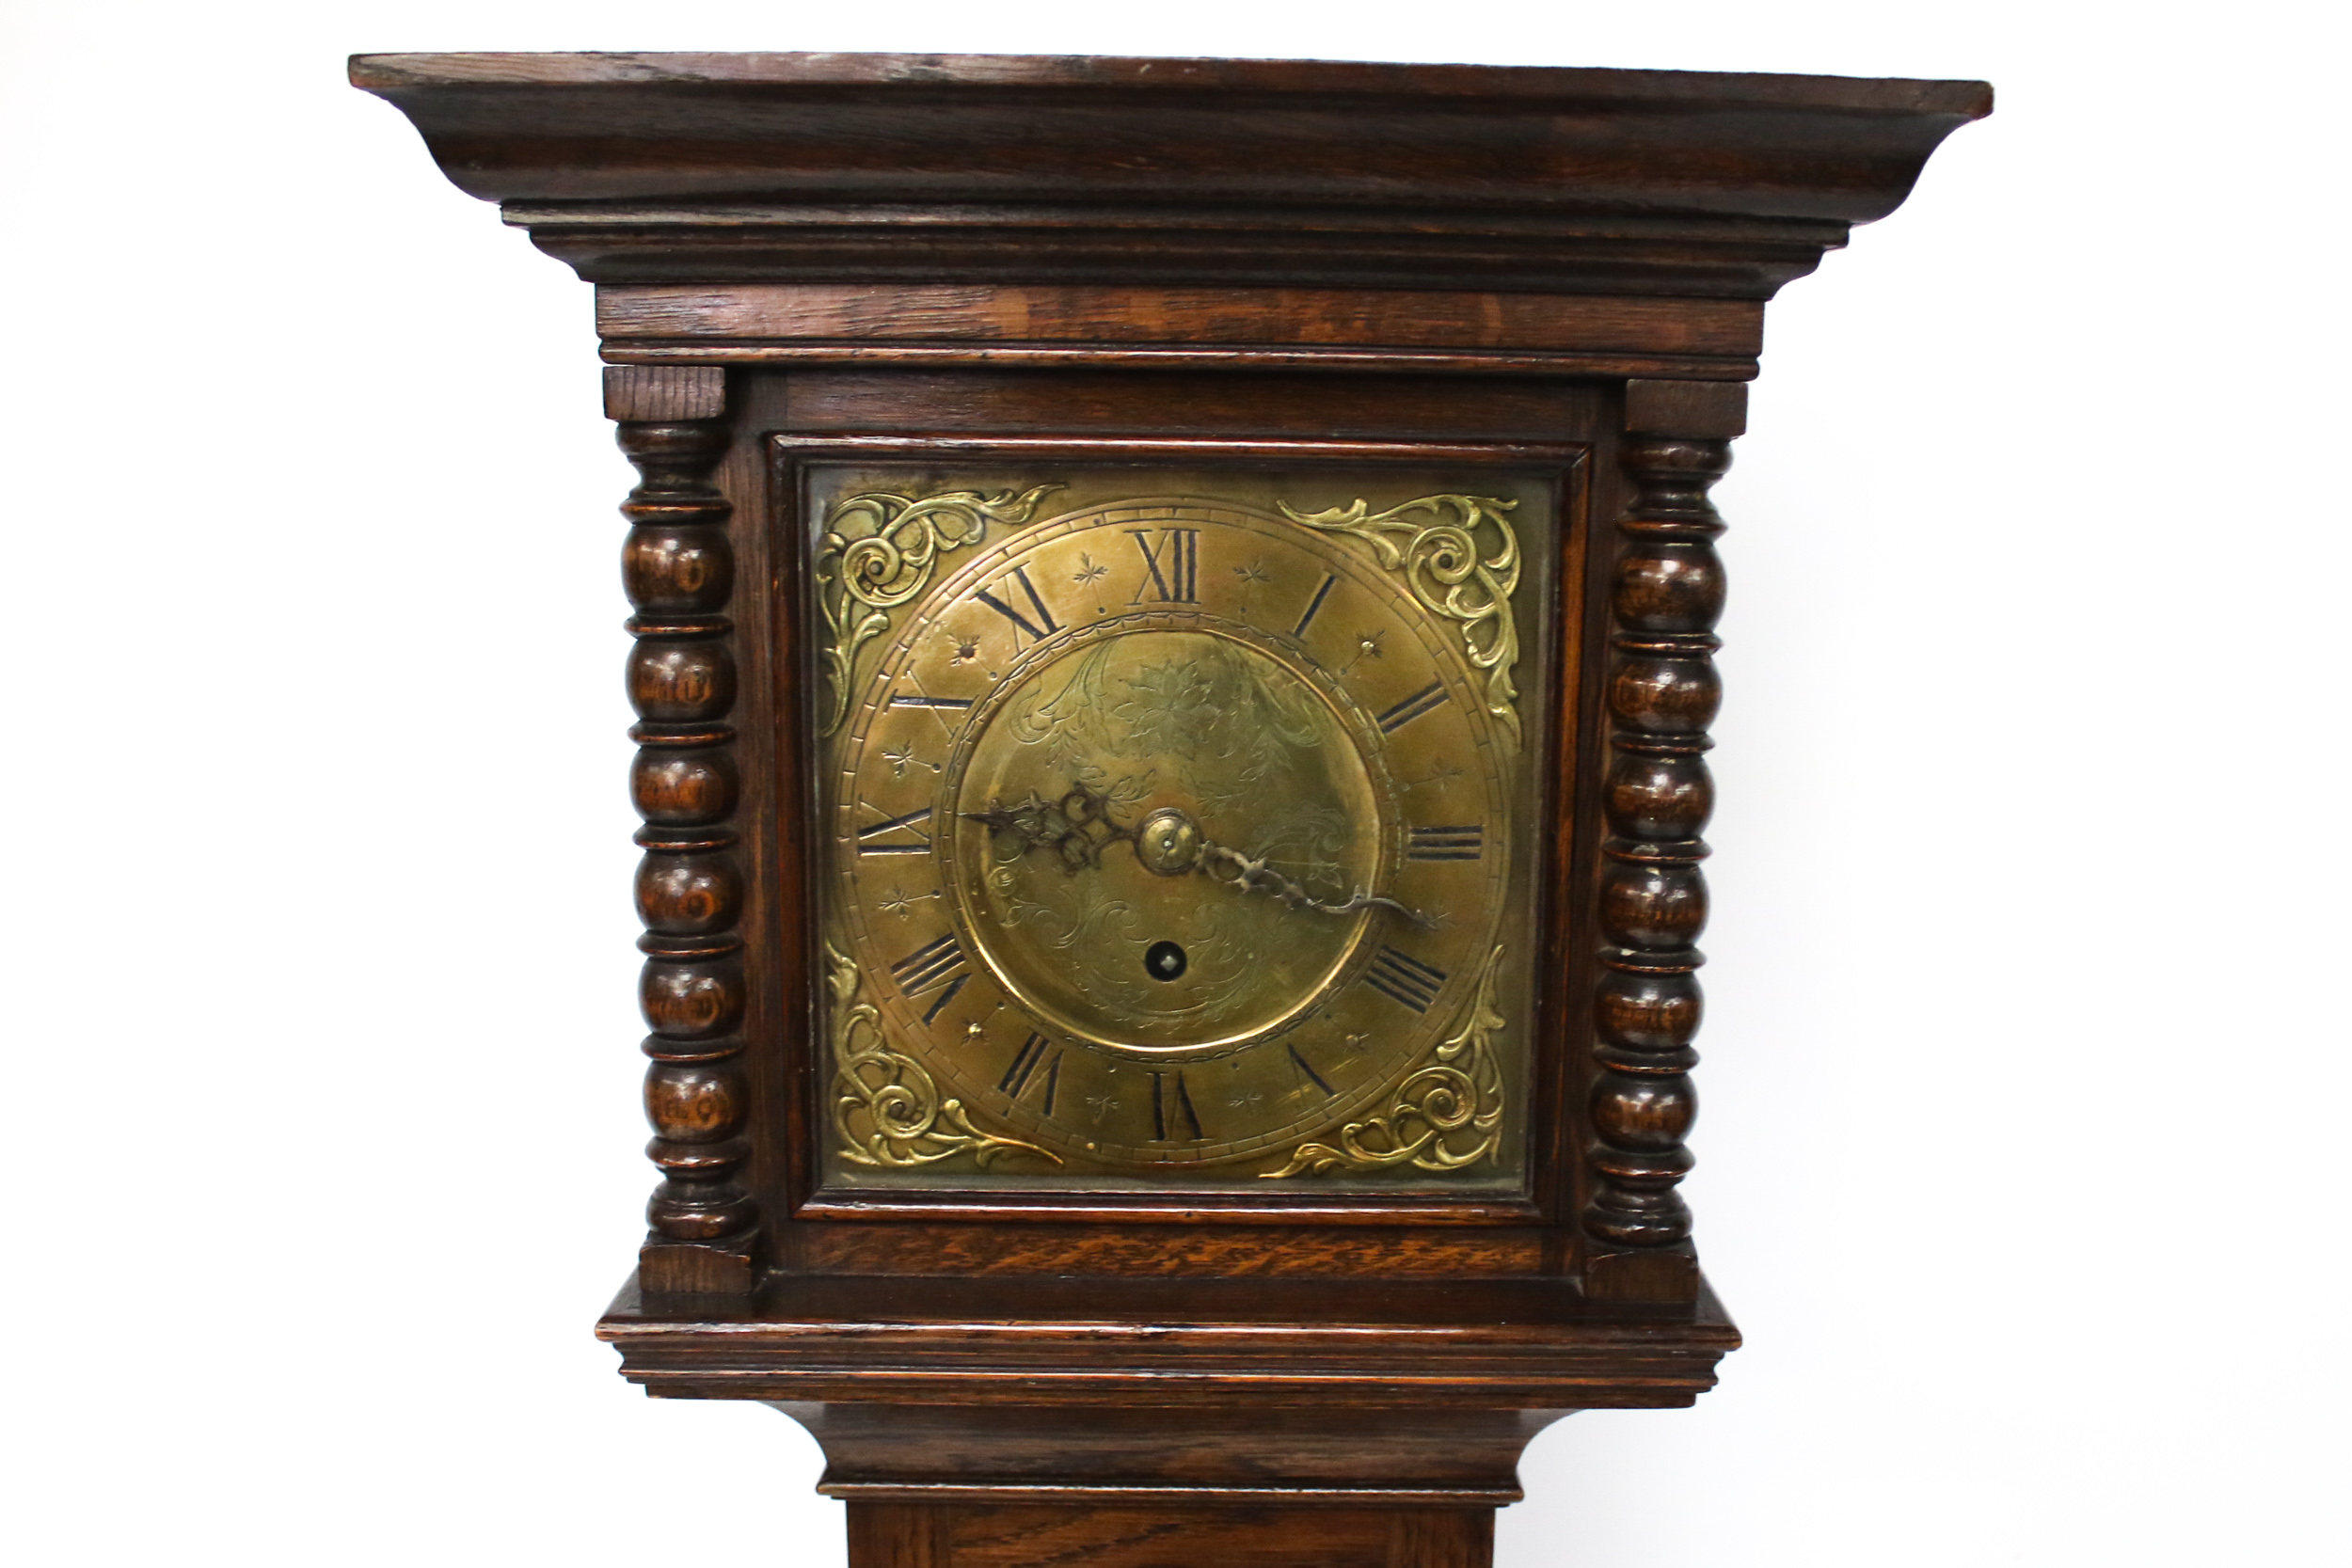 A 20th century grandmother clock with a 30 hour fusee movement. - Image 3 of 4